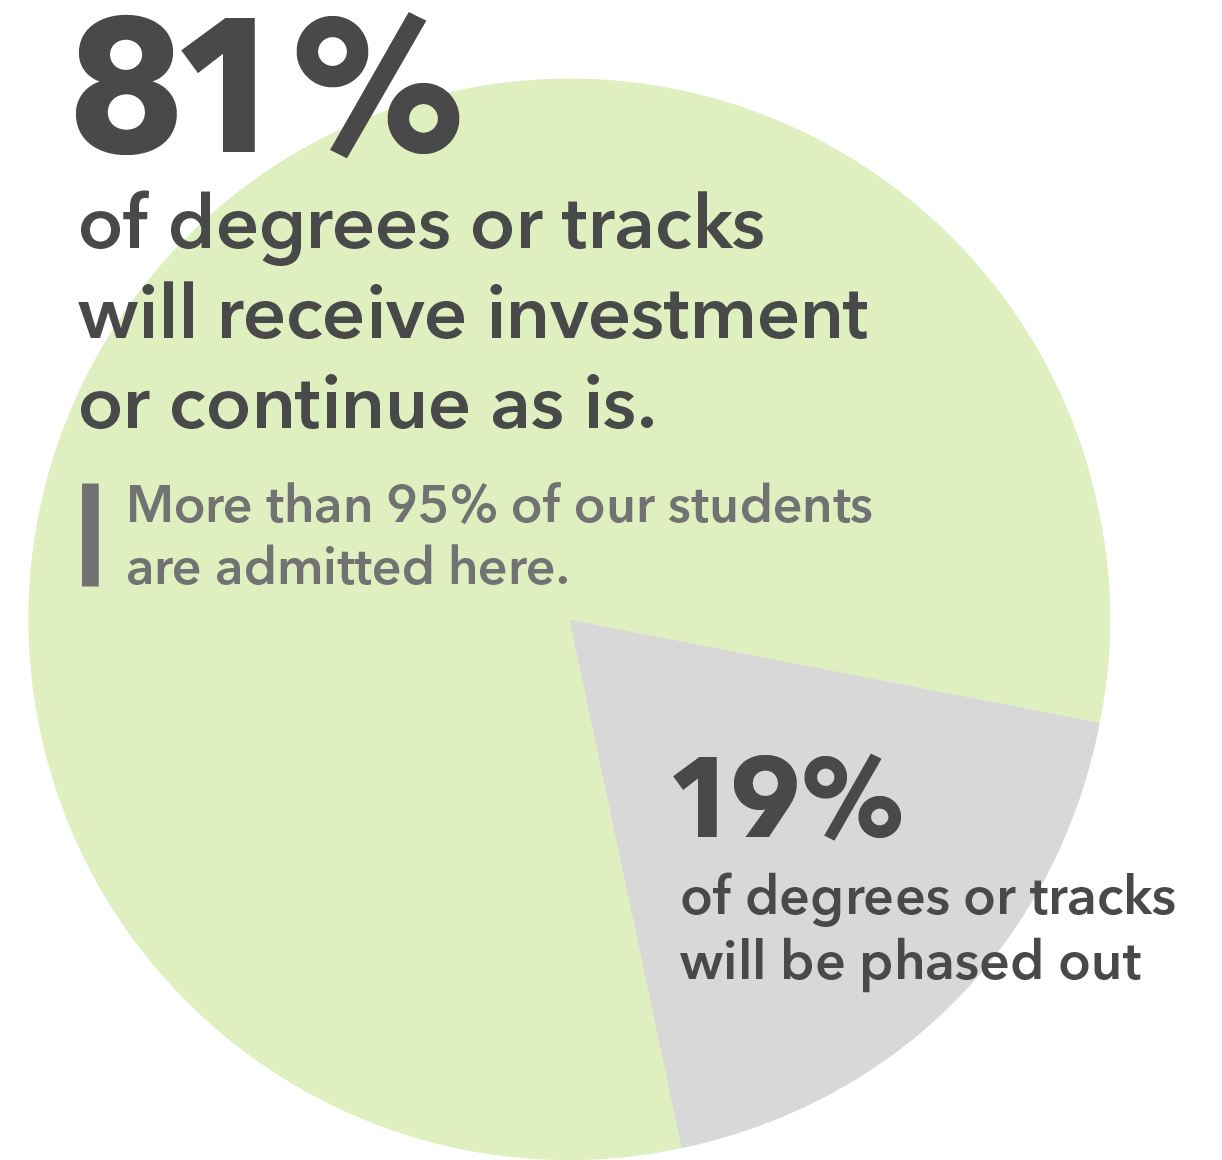 Pie chart showing that 81 percent of UA's degrees or tracks will continue or receive increased investment